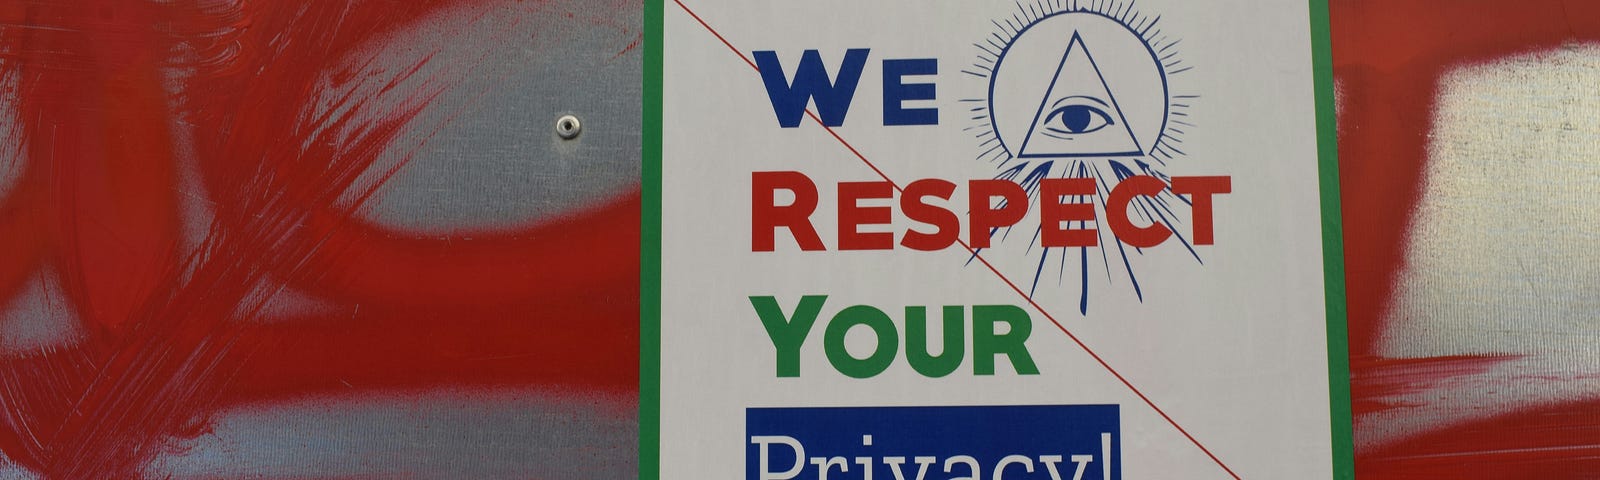 We respect your privacy sign over red graffiti.